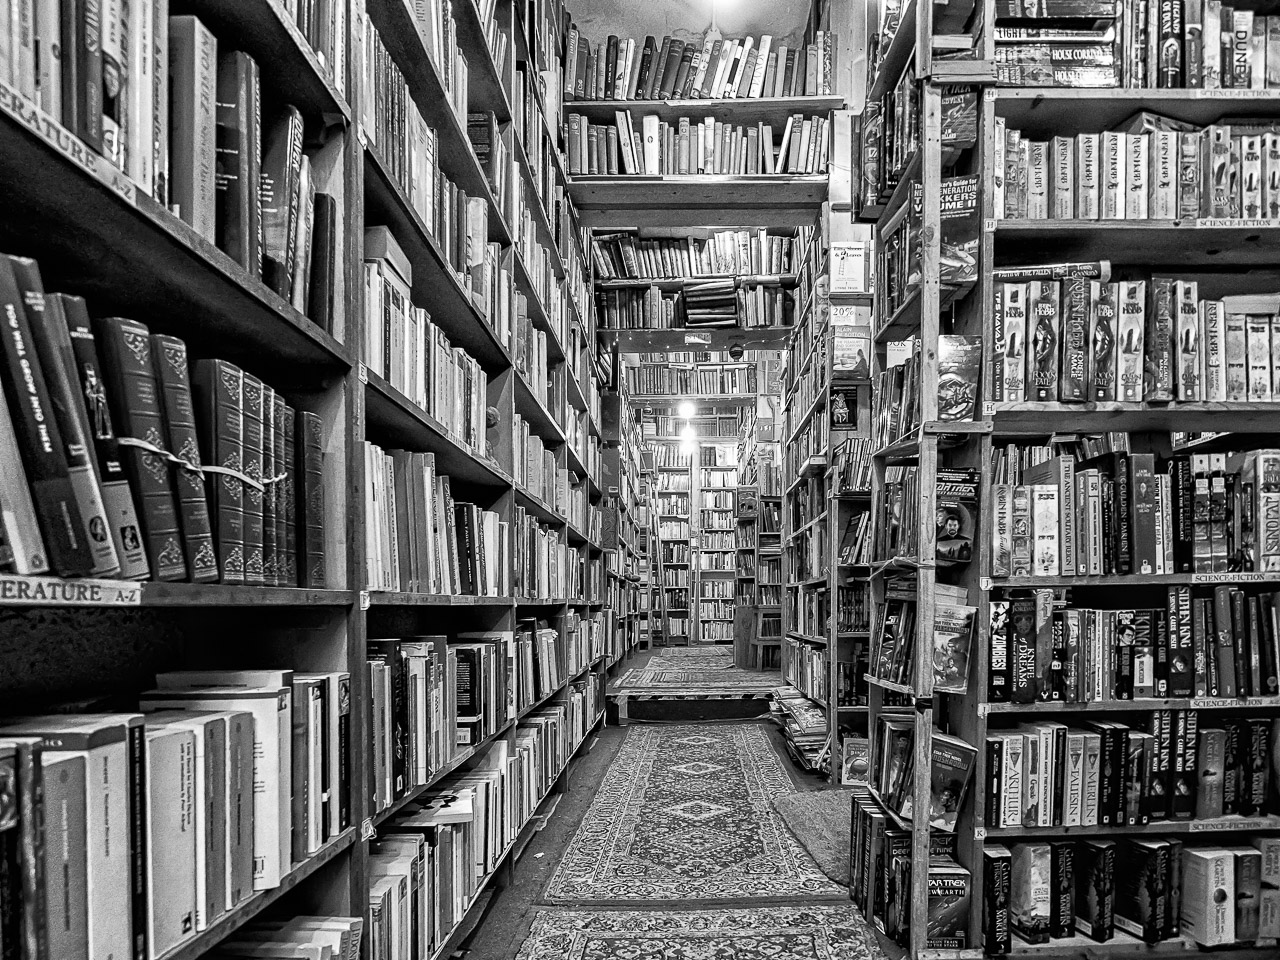 Doorway filled with books wall to wall